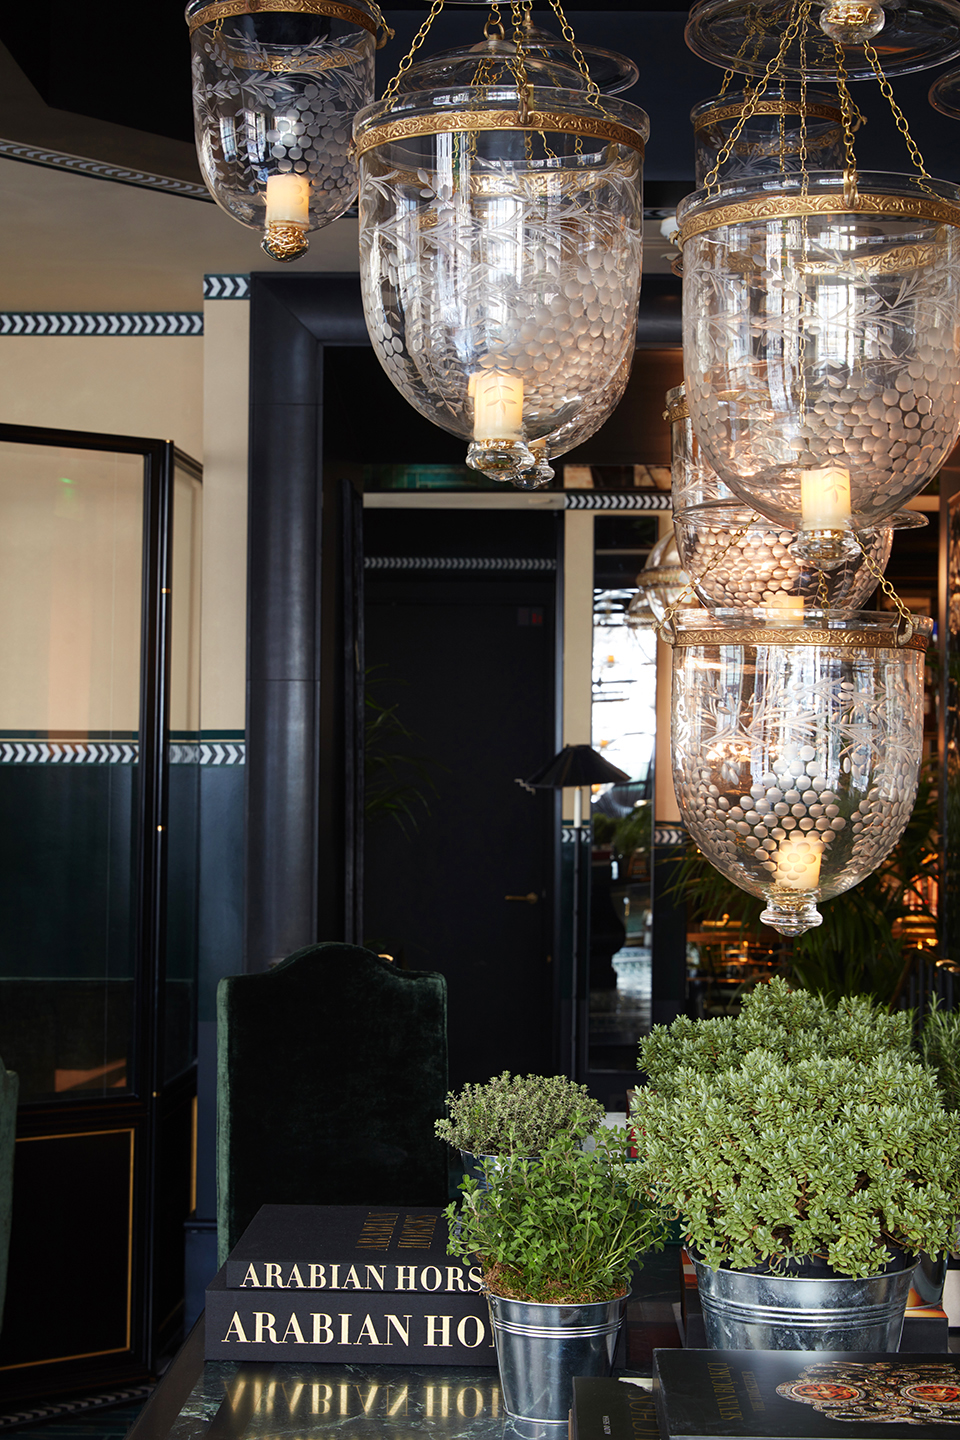 The lobby of Monsieur George, interior designed by Anouska Hempel, with abundant plants, Moroccan hanging lanterns and marble doorways – Effect Magazine